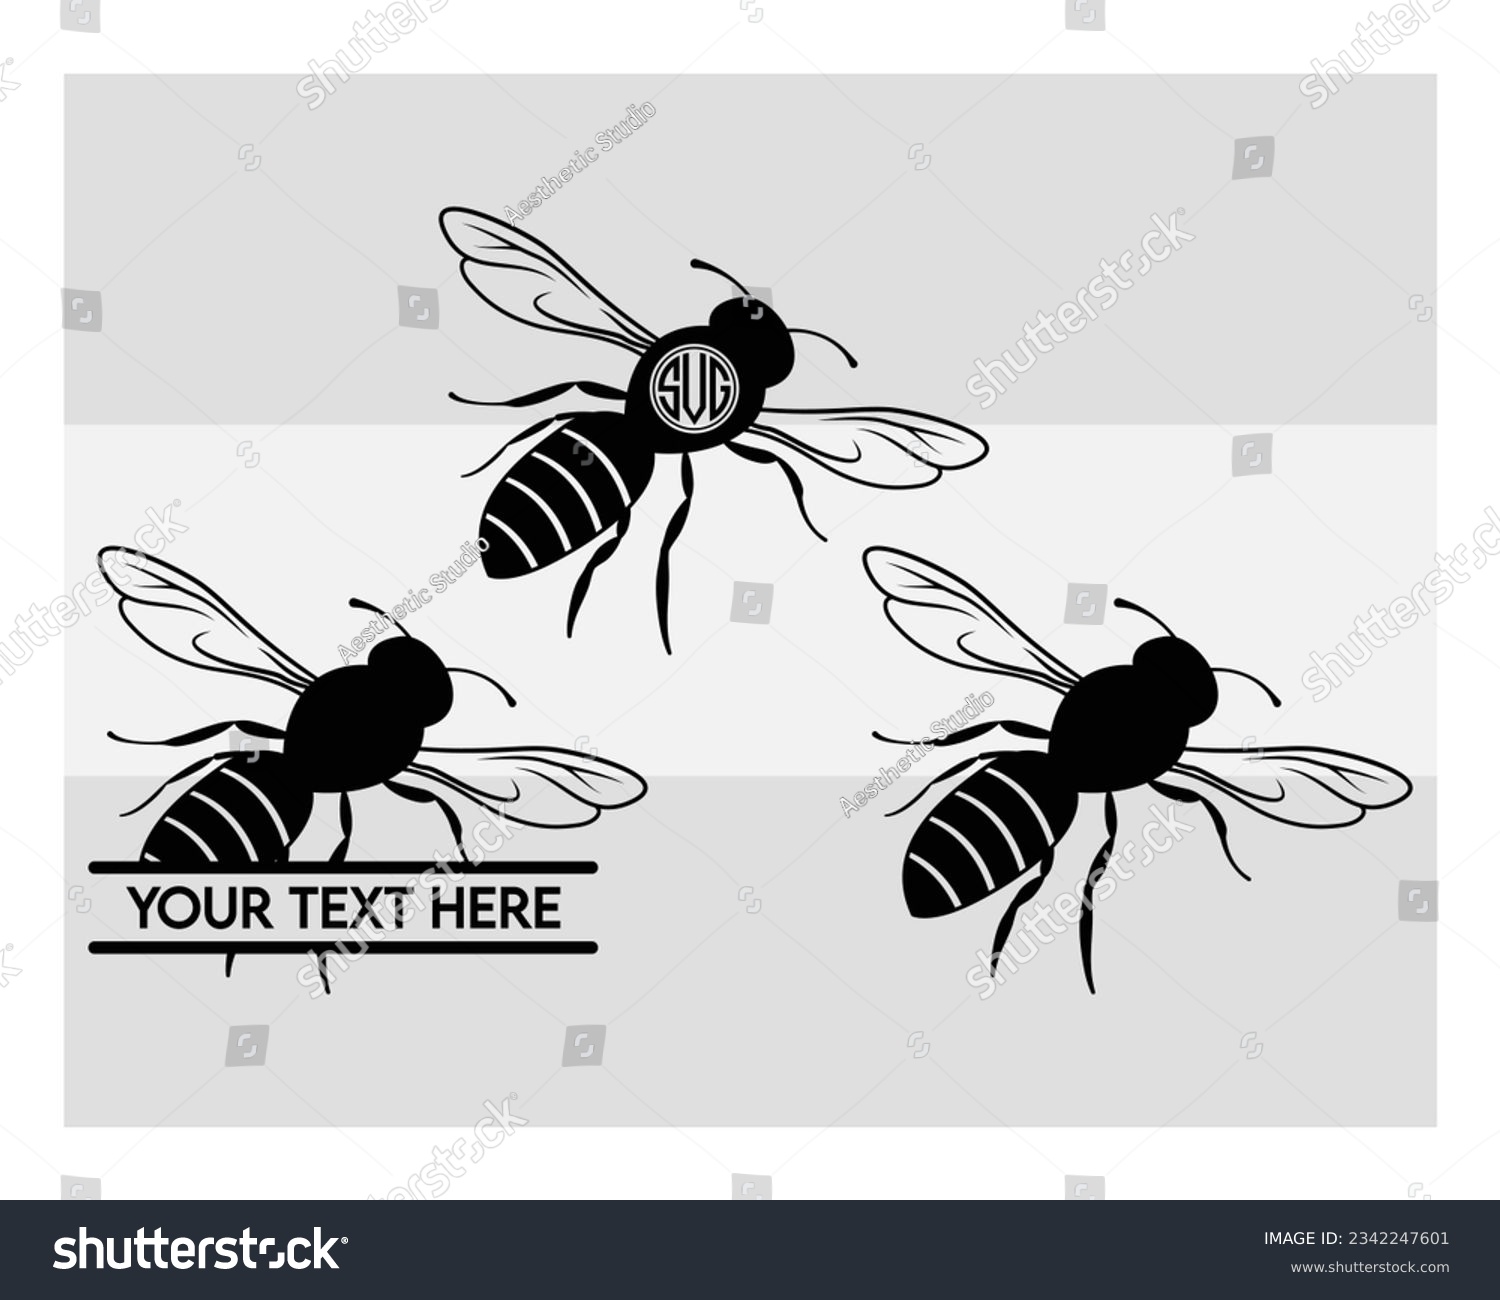 SVG of Bee, Bumble Bee Svg, Honey Bee Silhouette, Animals Svg, Circut Cut Files Silhouette, Bee Clipart Svg, Honeybee Svg, Silhouette, Vcetor, Outline, Eps, Cut file svg